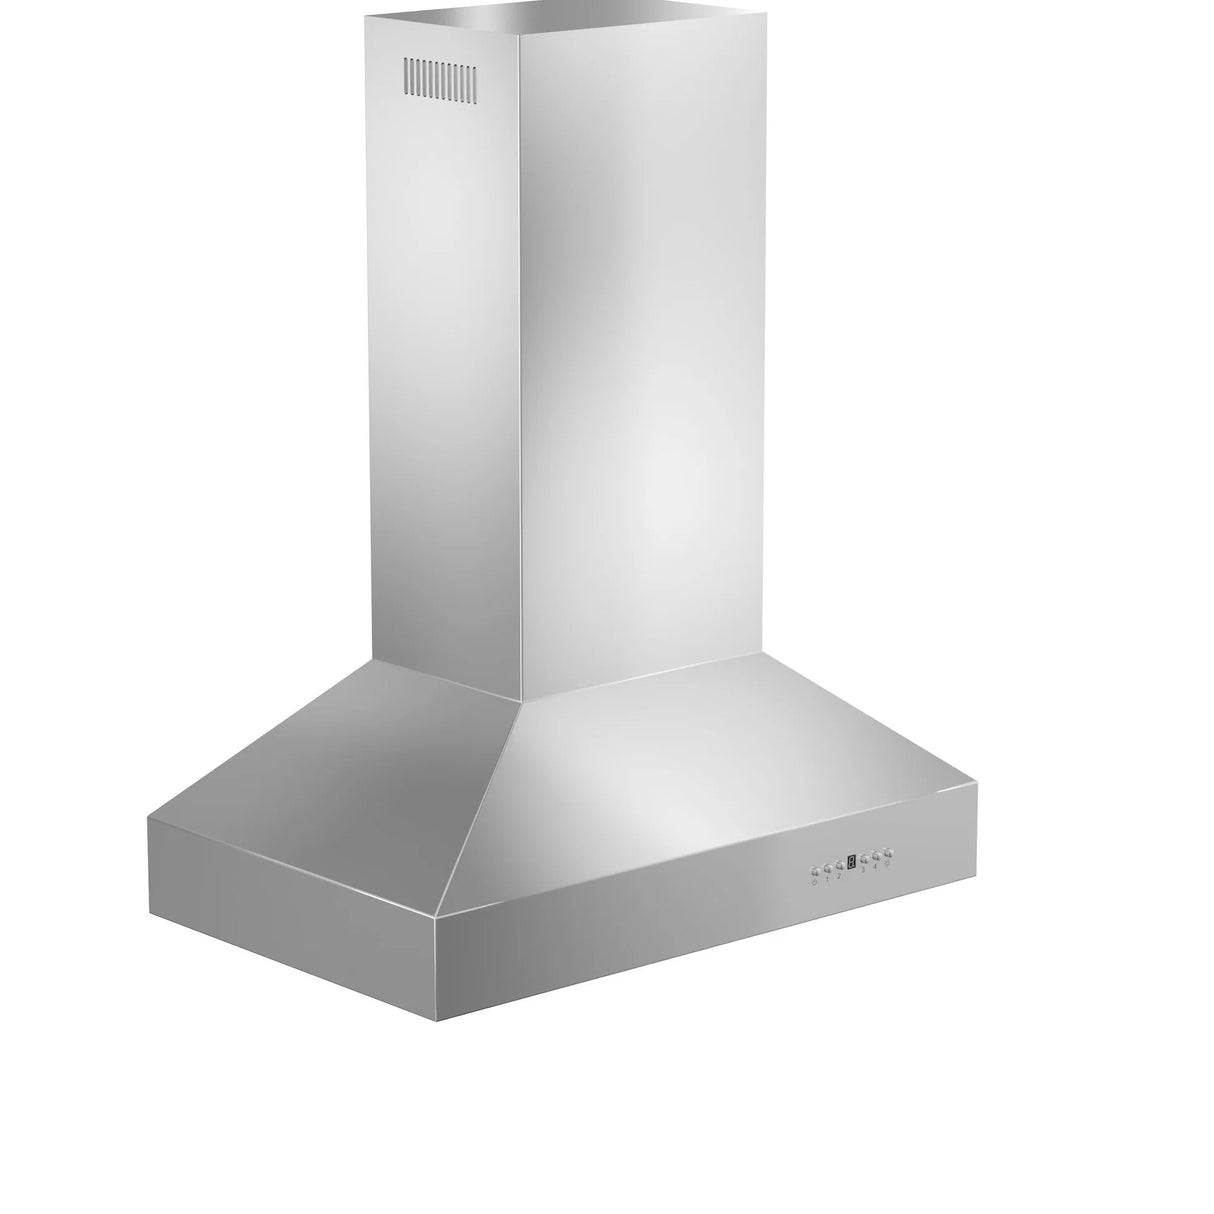 ZLINE 48" Ducted Island Mount Range Hood in Outdoor Approved Stainless Steel